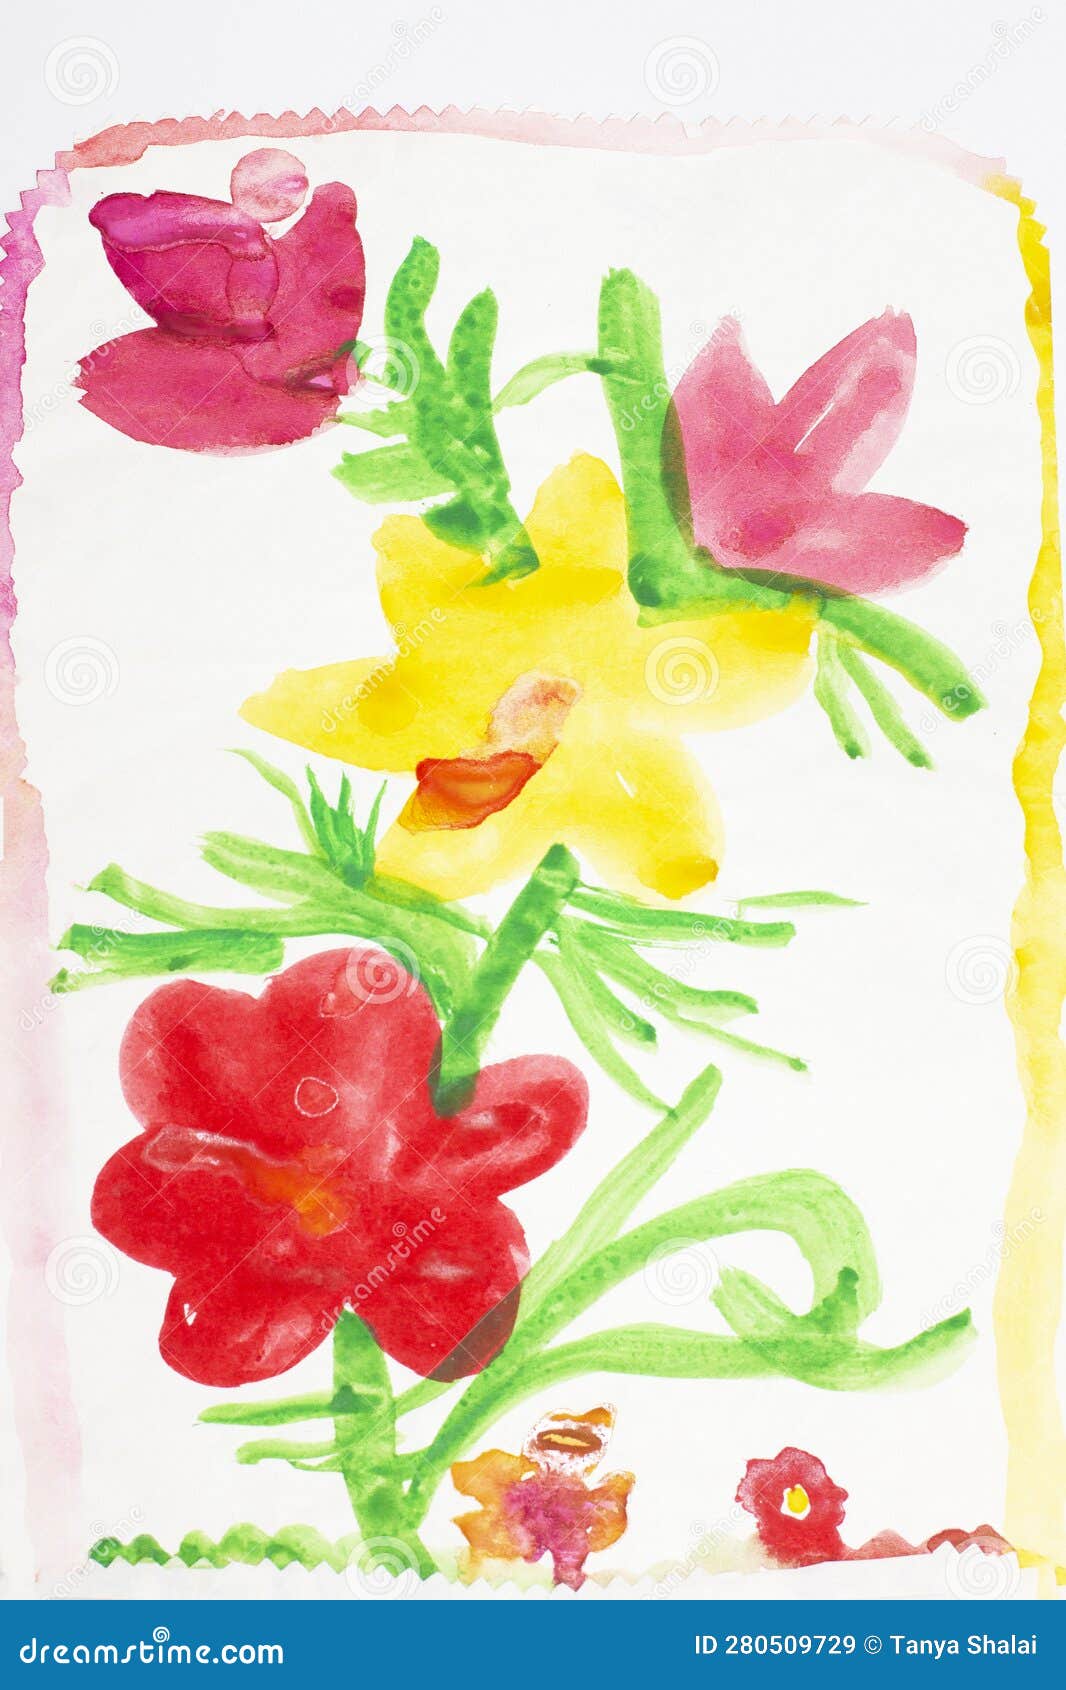 bouquet of bright flowers. real drawing of a small child. drawing by watercolor.